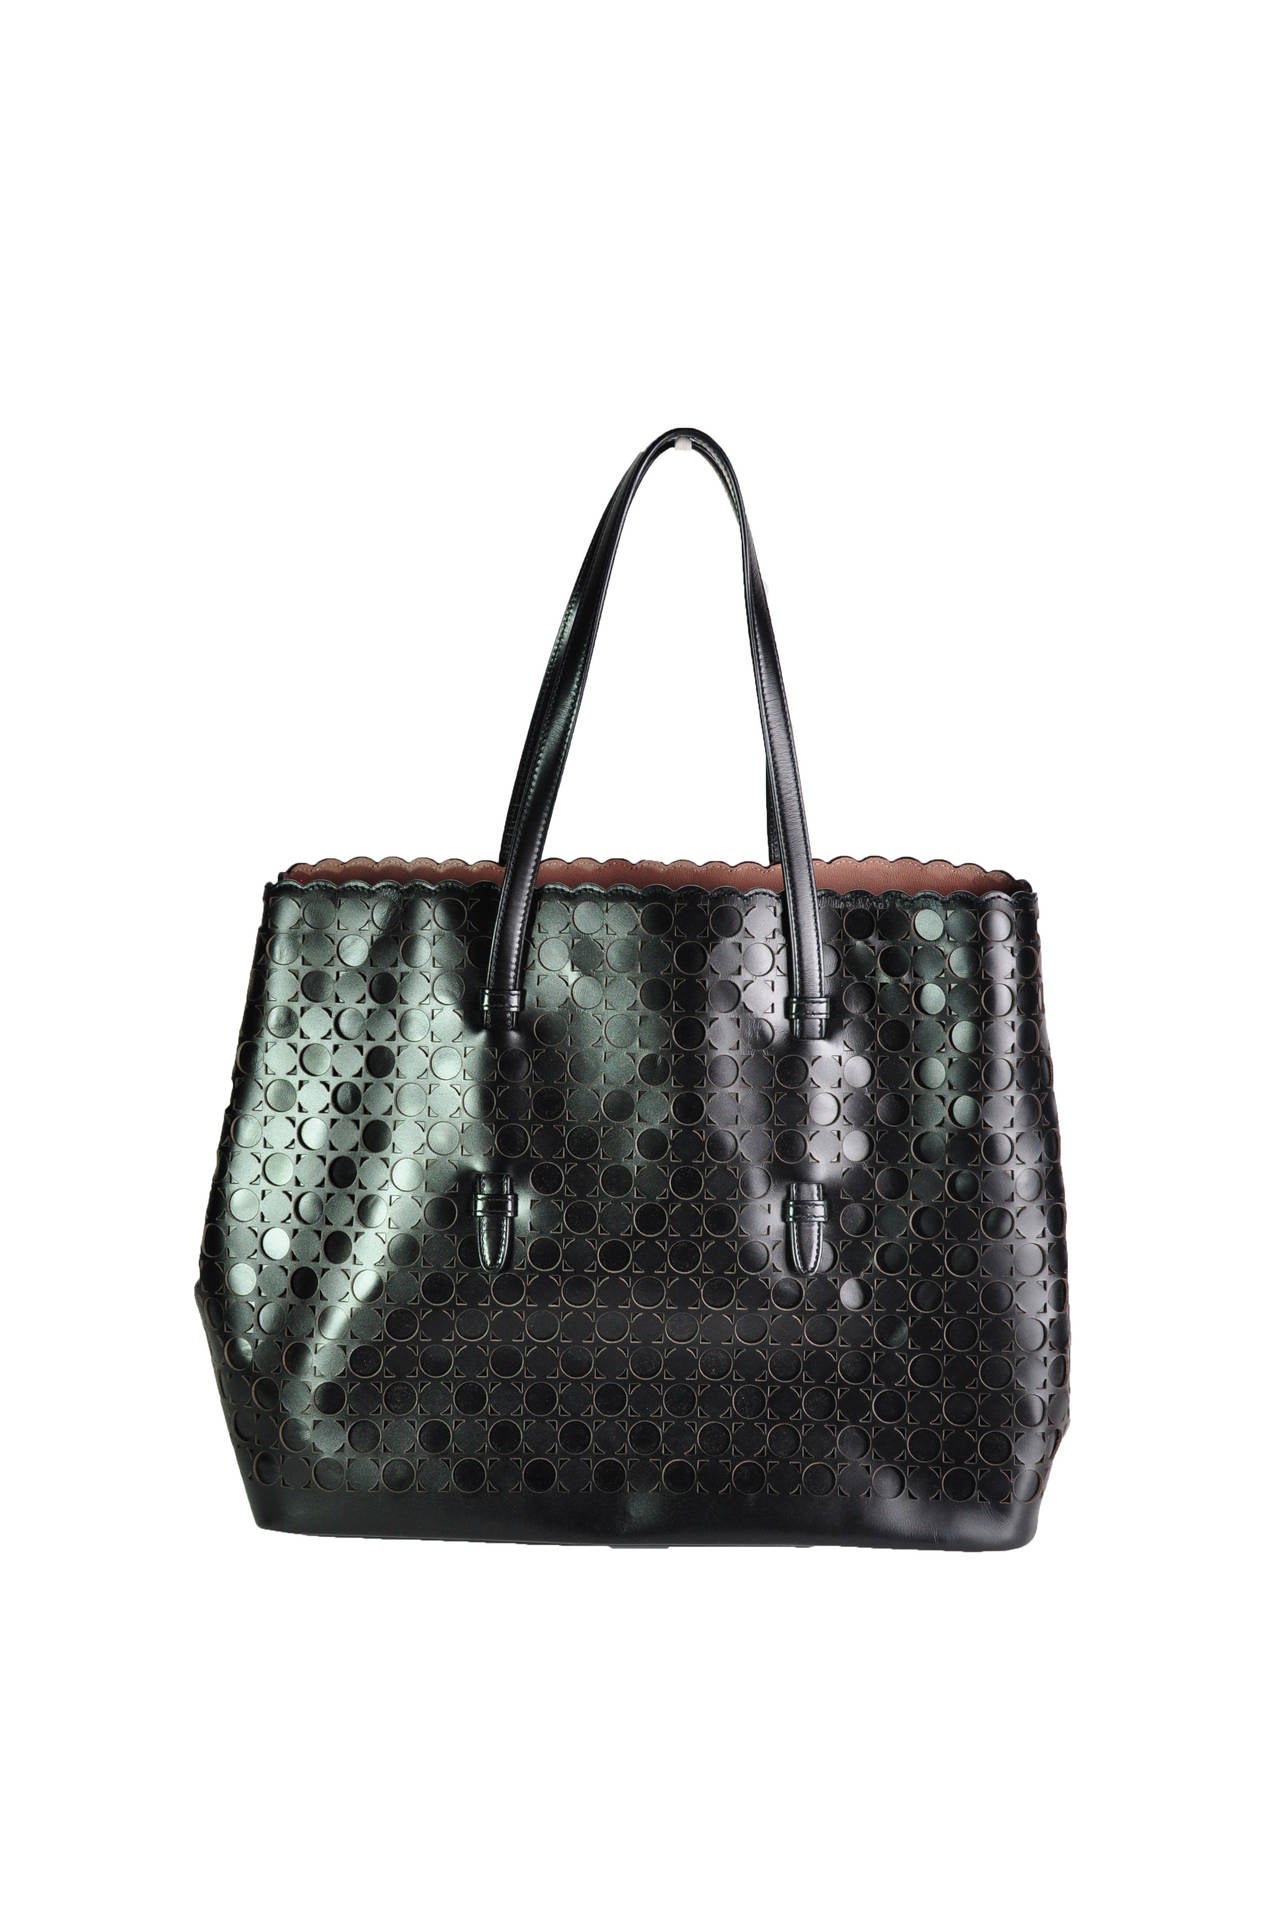 Black calf leather shopper tote from Alaia features with a scalloped top closure and expandable snap fastening sides. Dual handles on top, cut out patterned detailing to the front and rear with the iconic blush-hued interior. Comes with a detachable